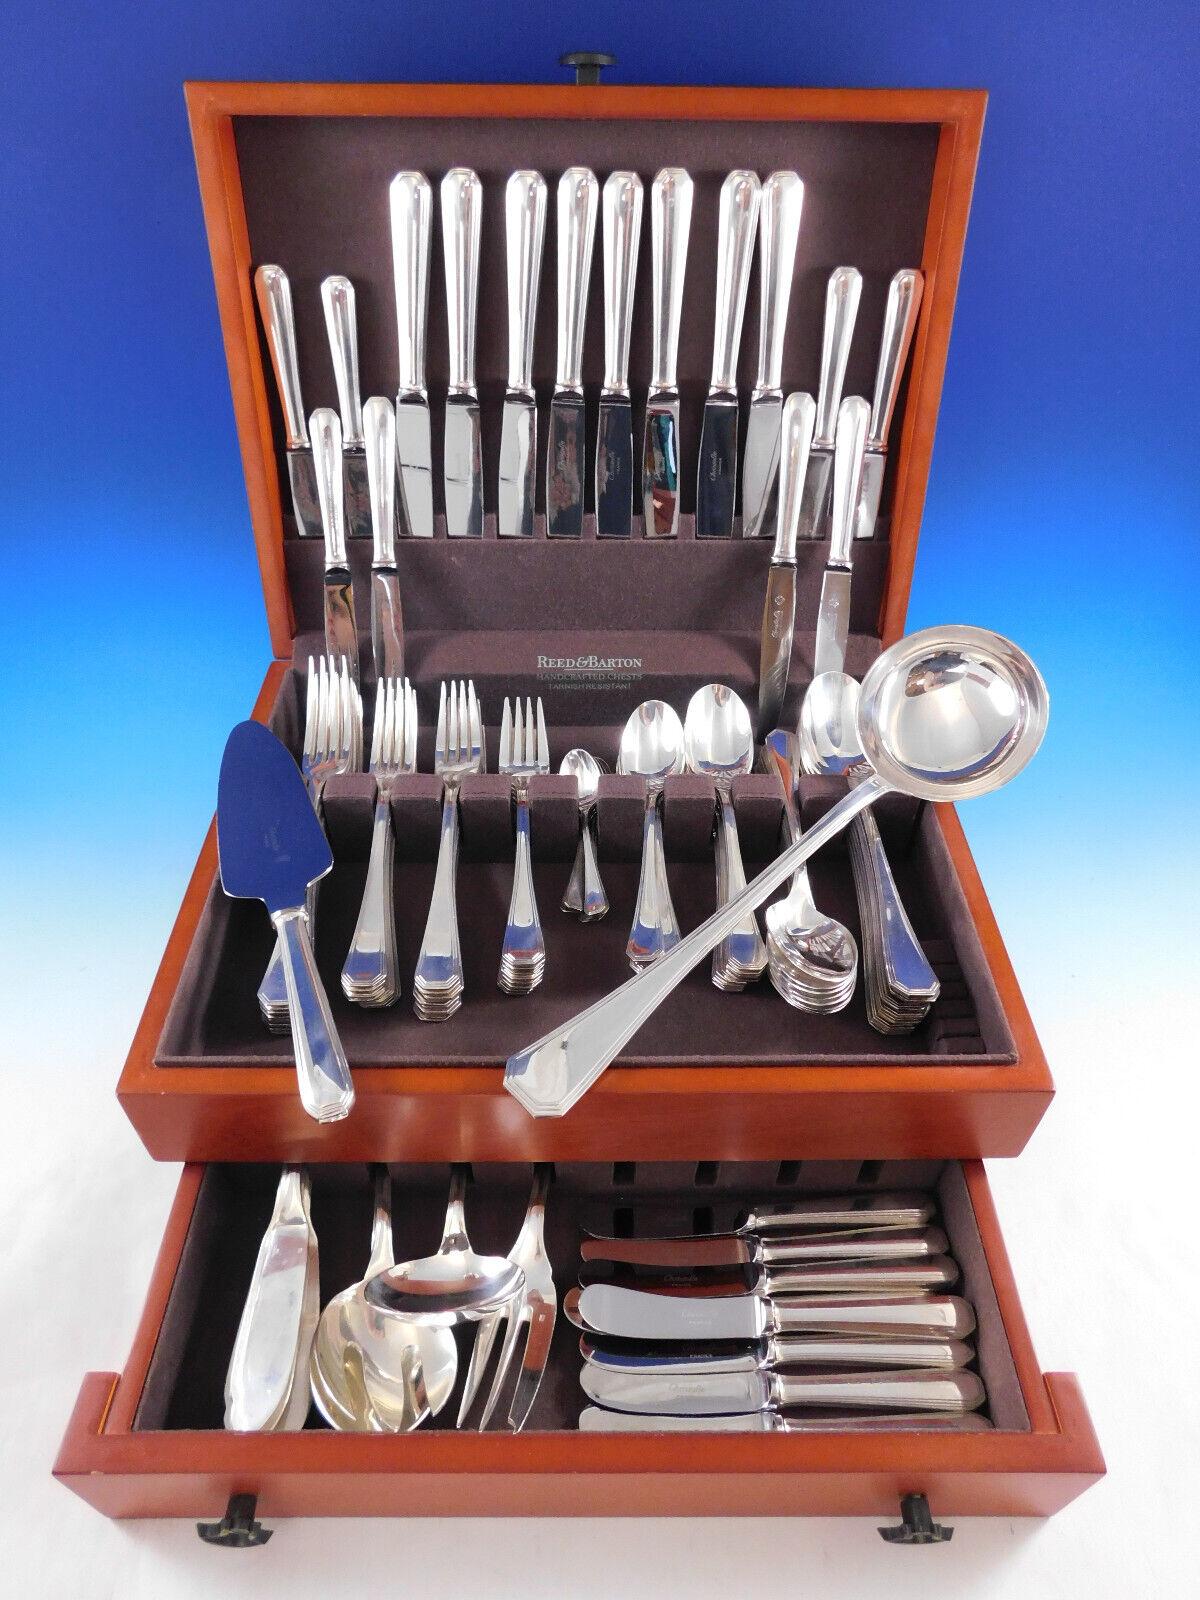 With a dedication to perfection and quality, Christofle flatware creations unite craftsmanship and modern technique, resulting in flatware to be handed down through generations. 

Following World War I, America became synonymous with modernity and